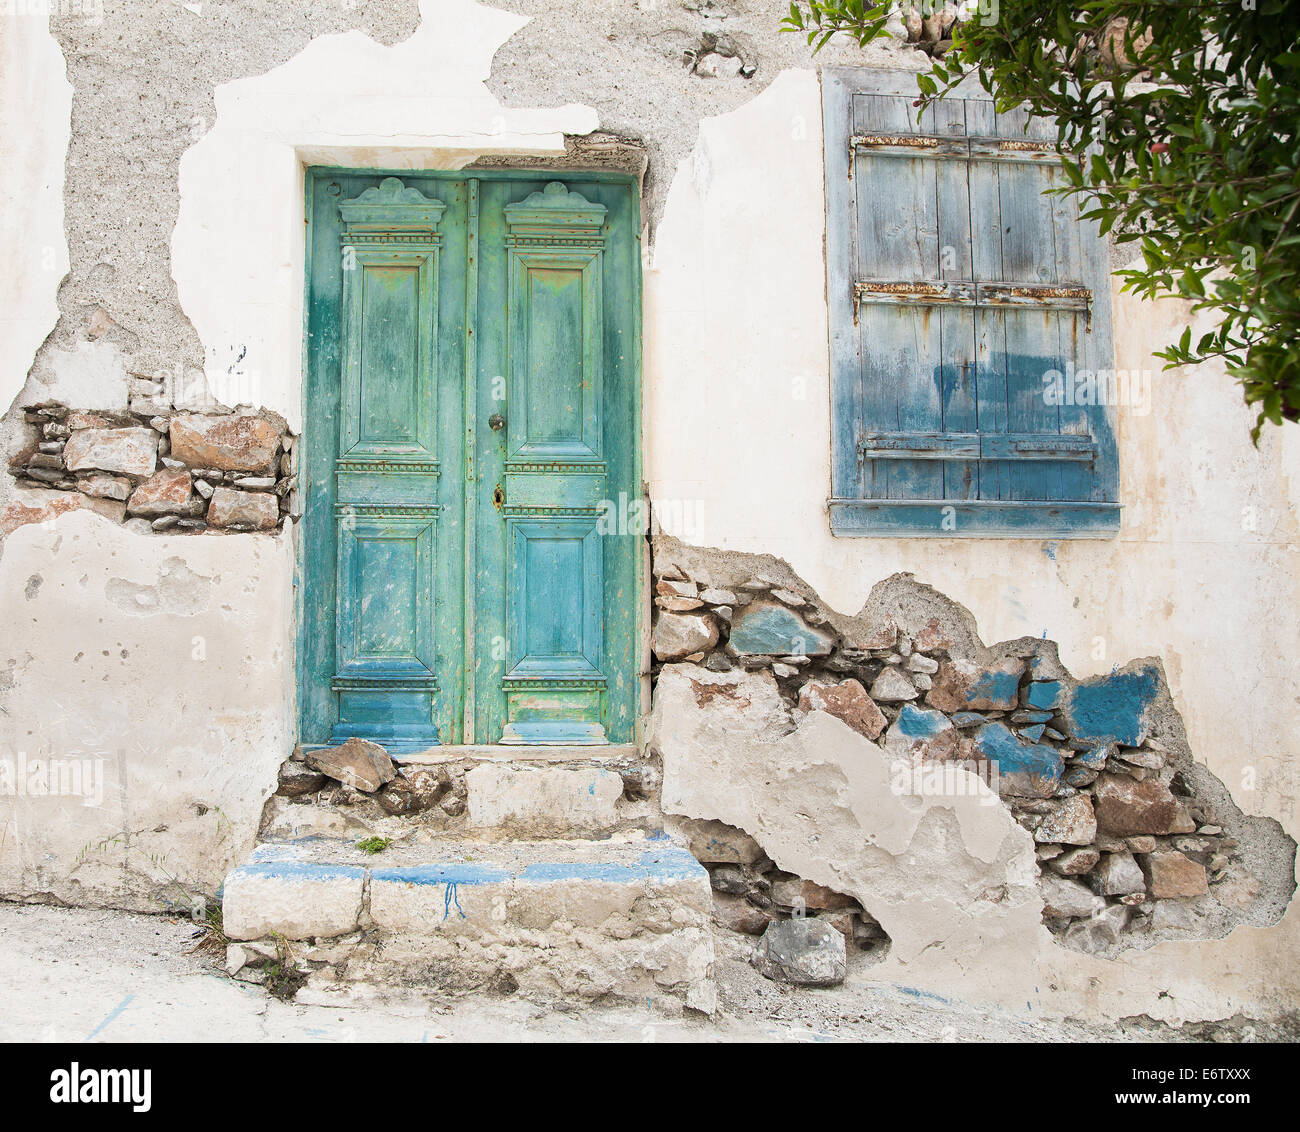 Old wooden door of a shabby demaged house facade or front in blue, green and turquoise. Stock Photo